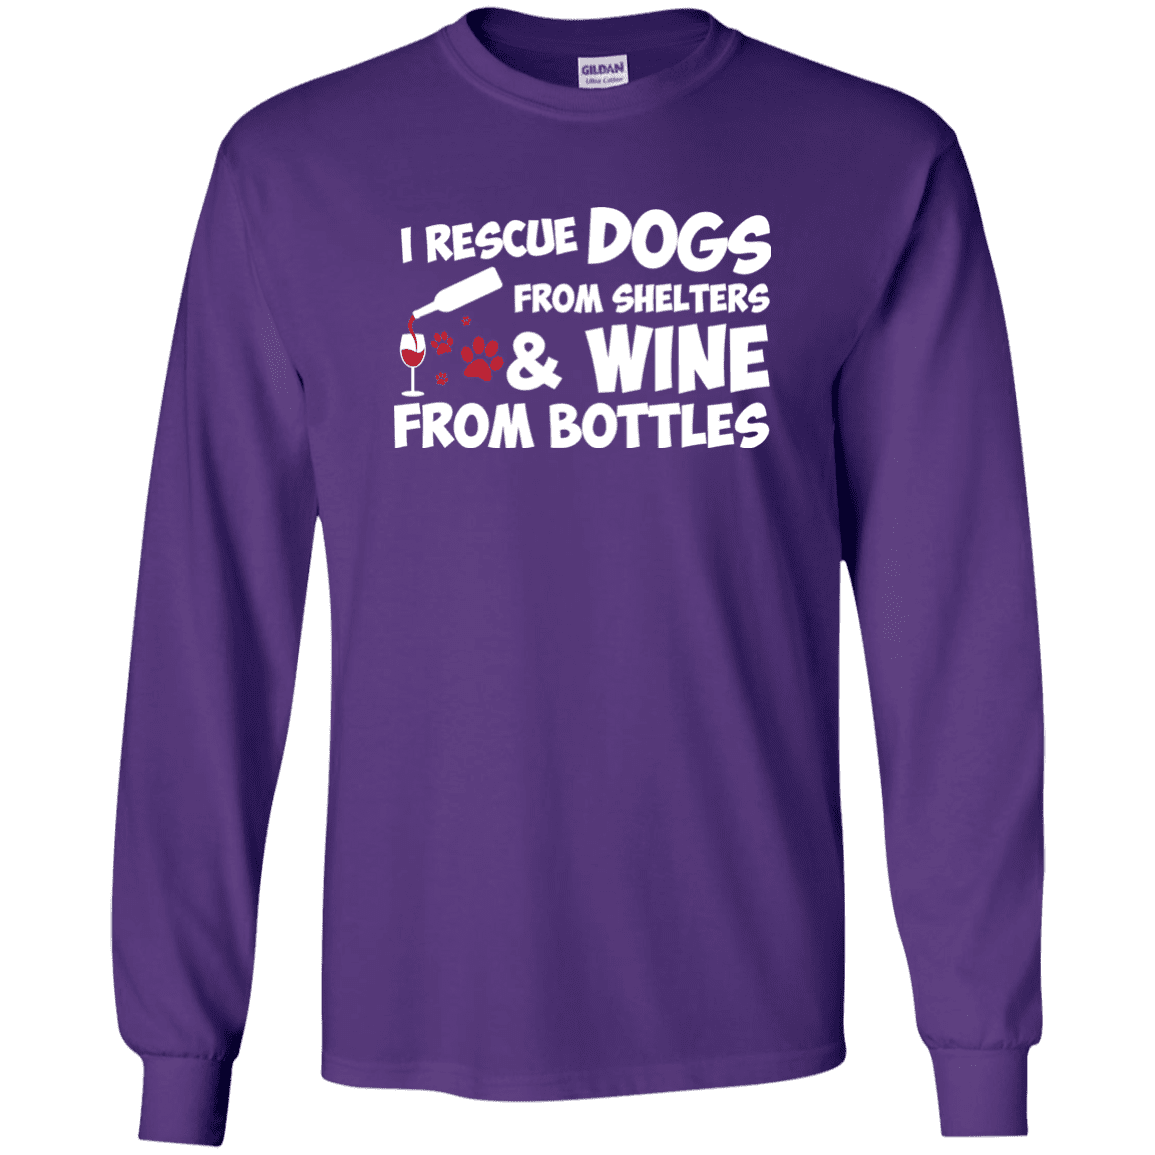 I Rescue Dogs And Wine - Long Sleeve T Shirt.